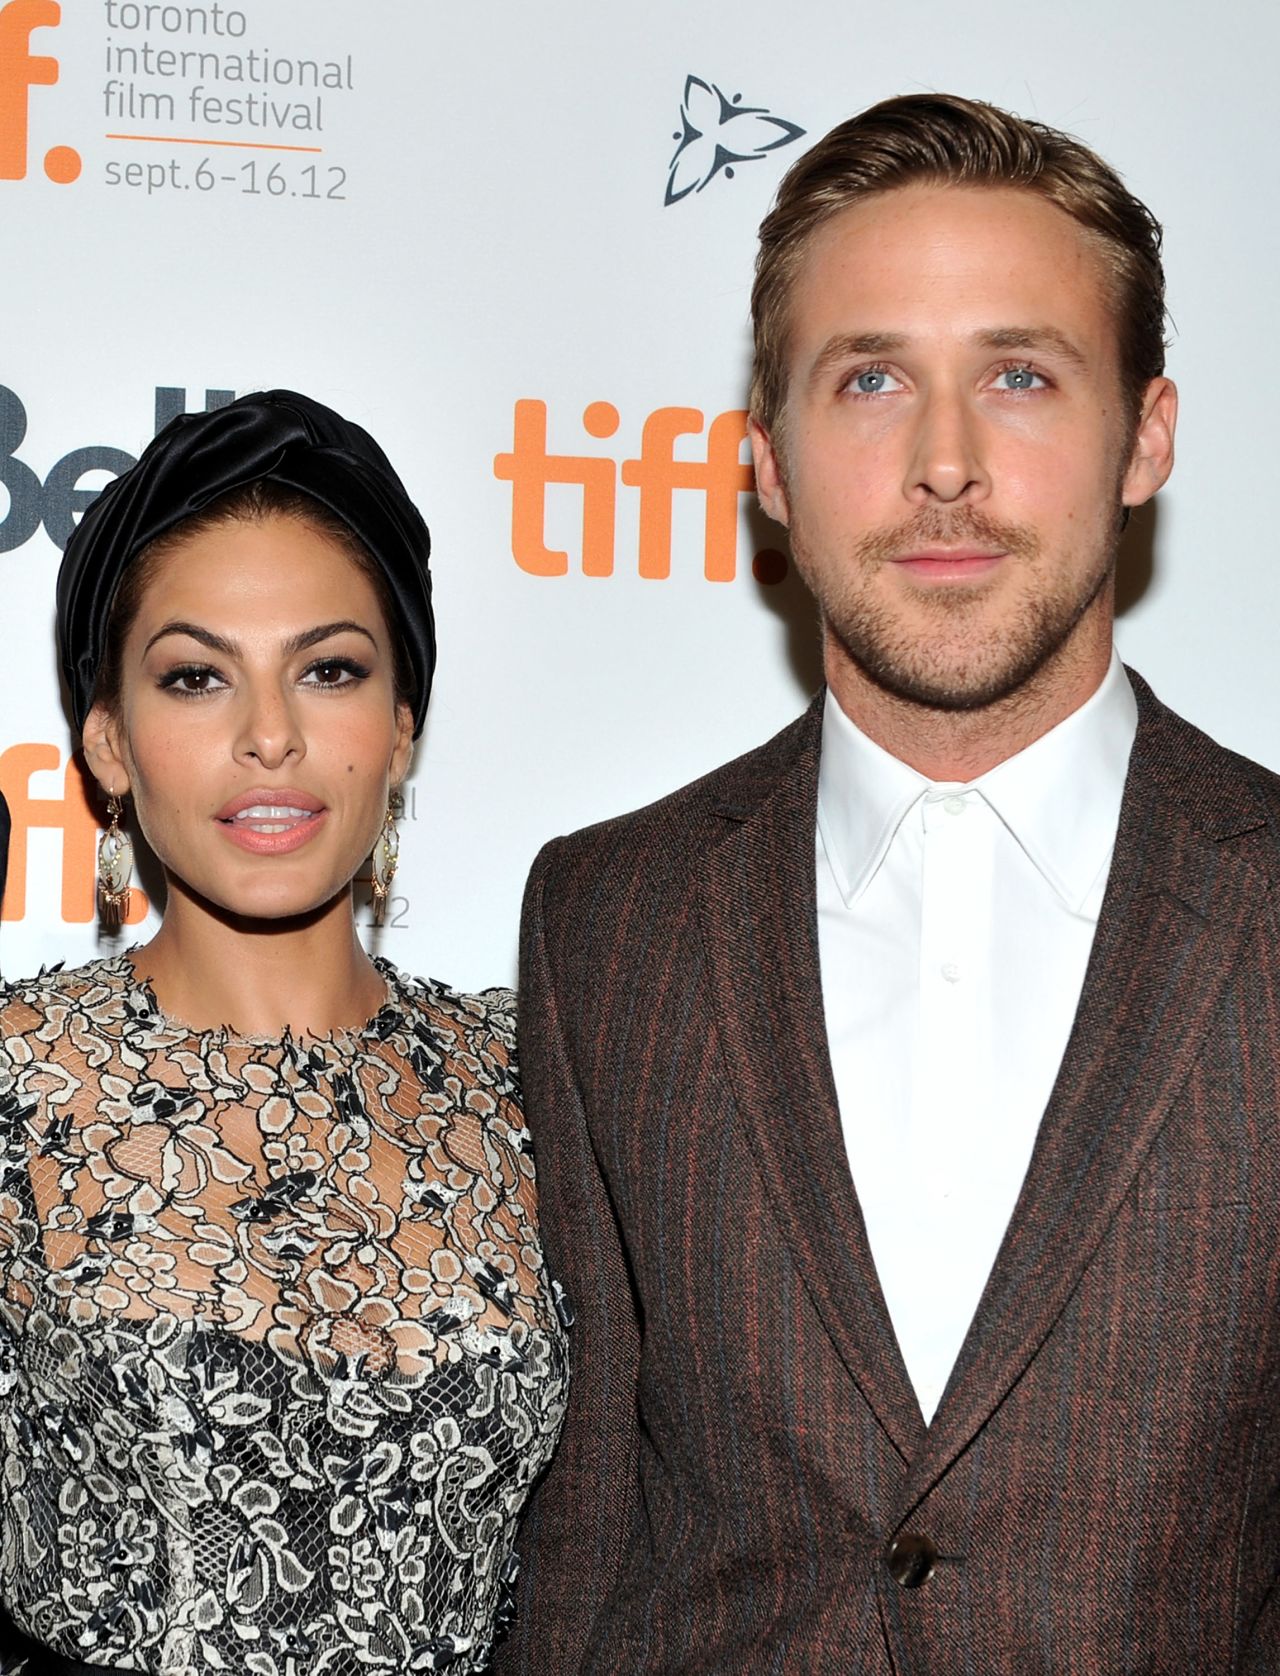 Ryan Gosling and Eva Mendes never talked much about their relationship, they've never confirmed that they were expecting a baby, and they've been mum about the <a href="http://www.cnn.com/2014/09/17/showbiz/celebrity-news-gossip/eva-mendes-ryan-gosling-baby/">reported birth of a daughter.</a> They aren't the only Hollywood couple who have shied away from sharing their personal lives. 